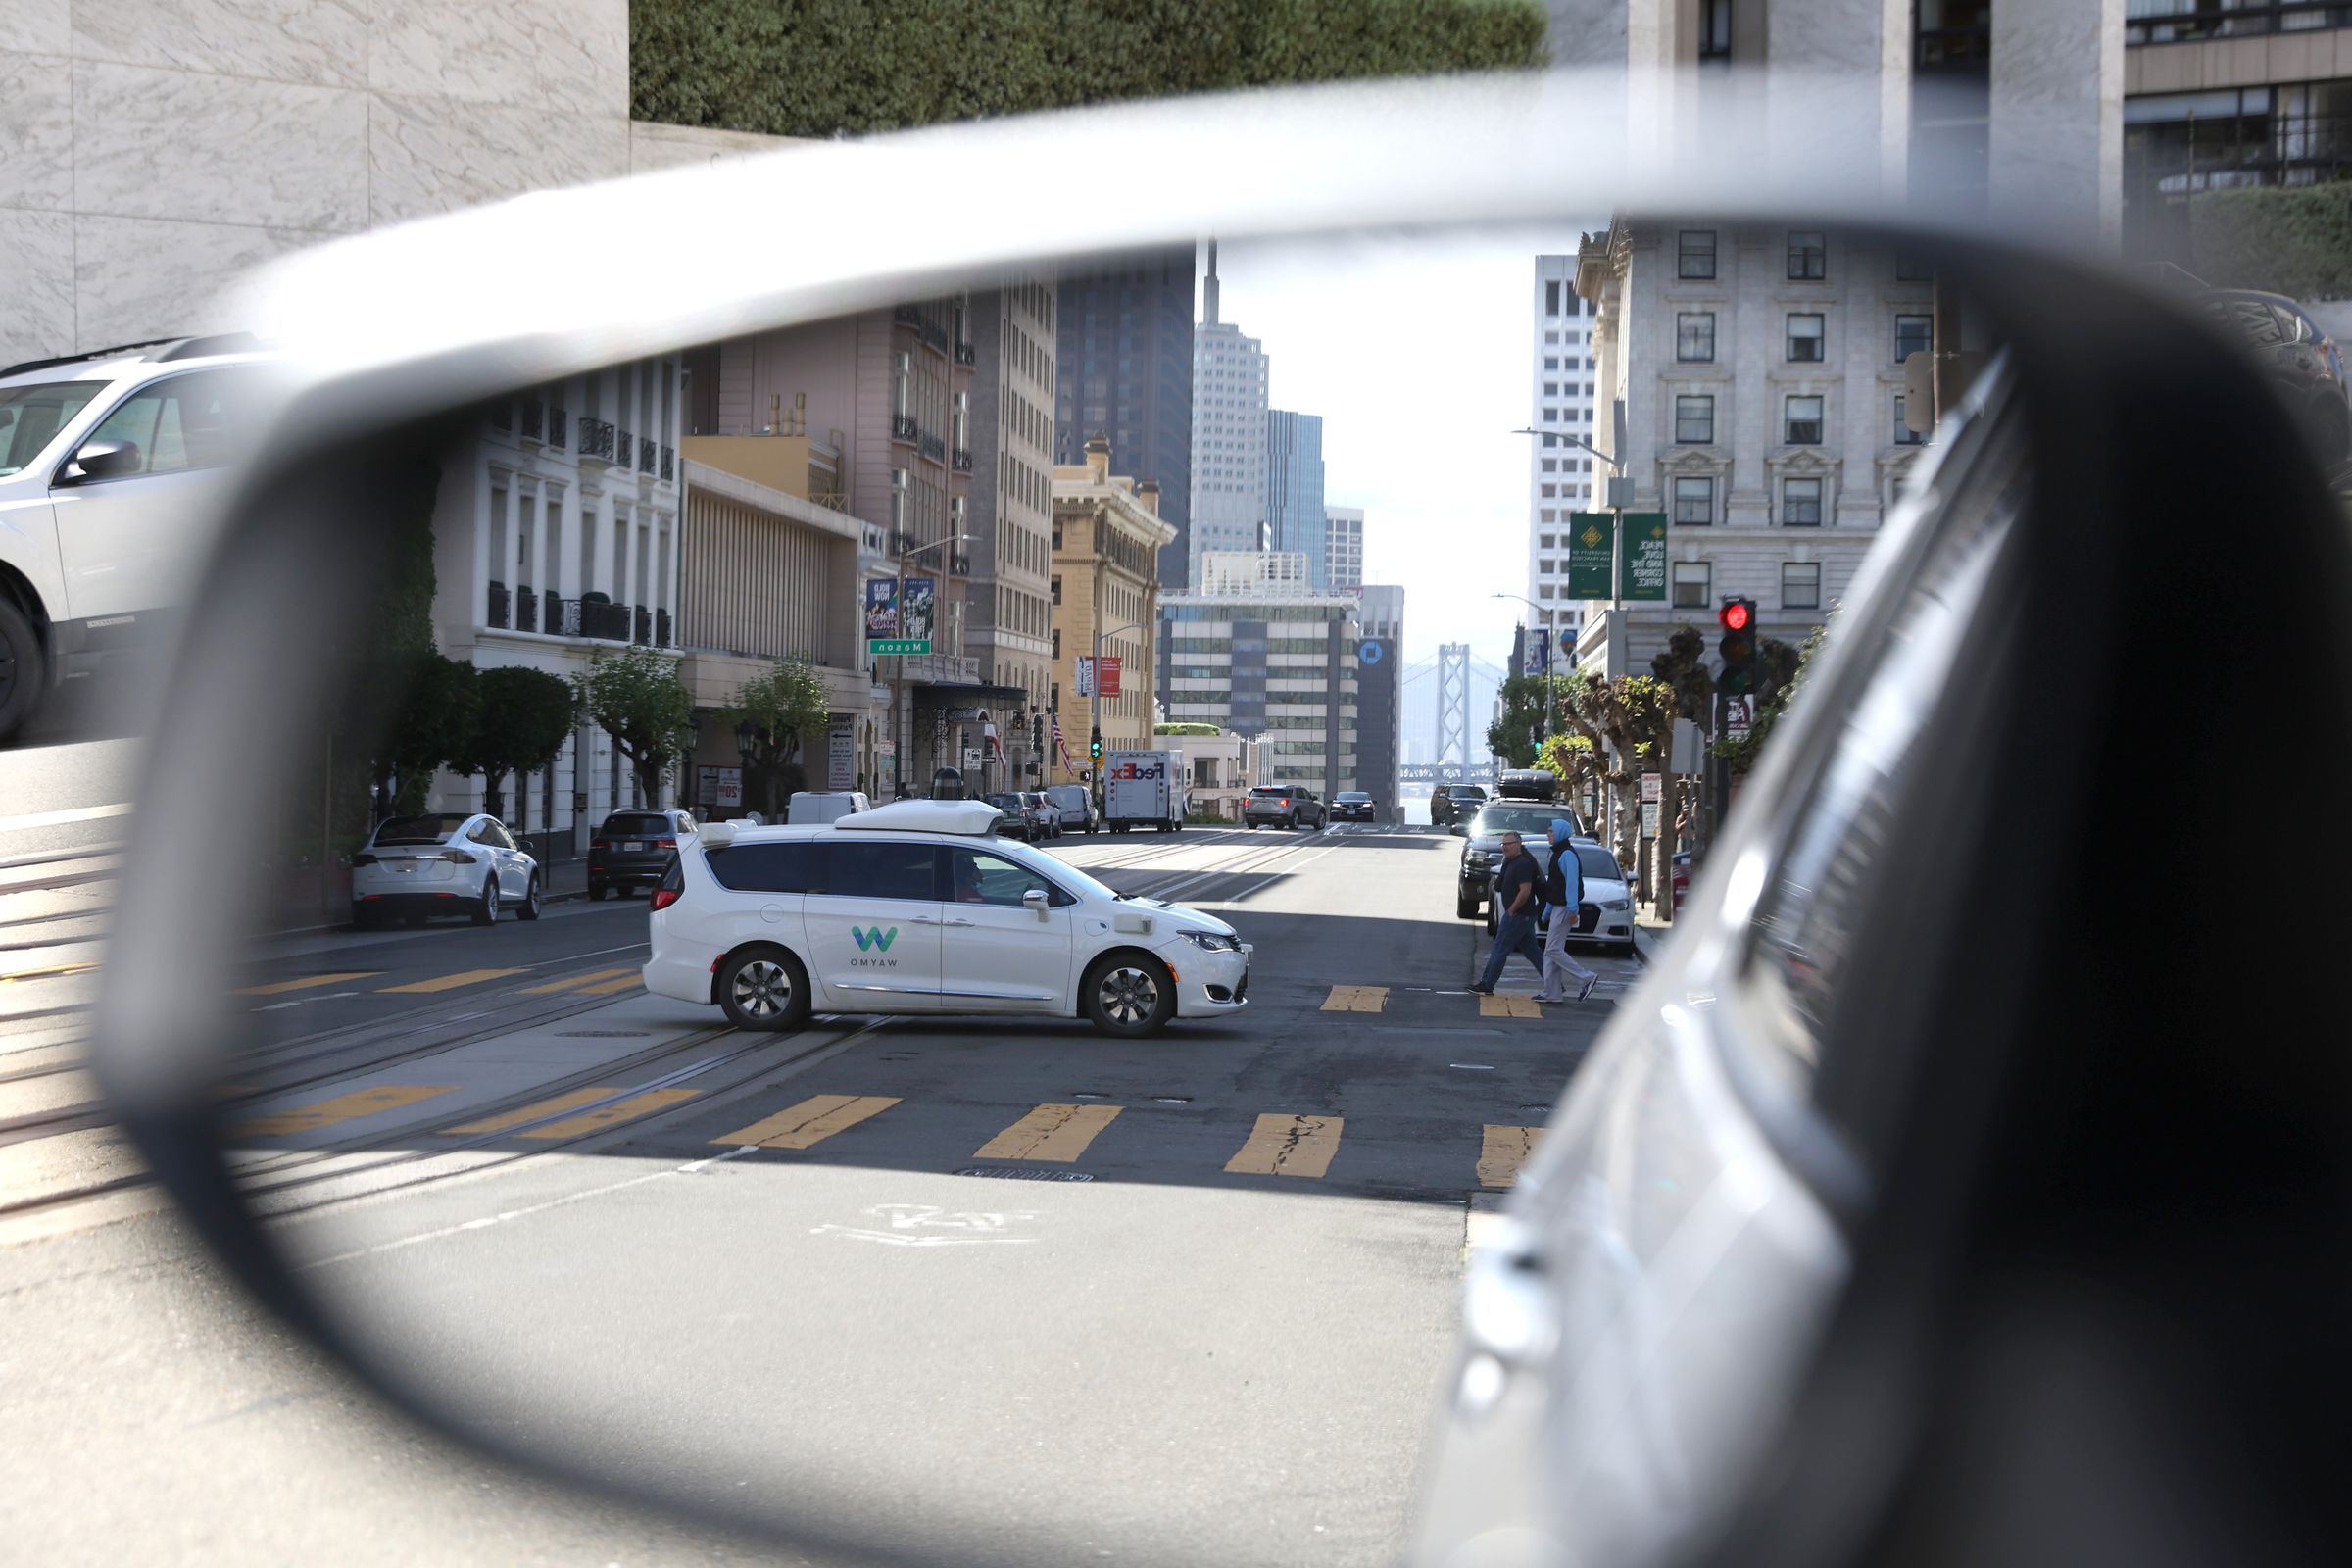 A Waymo autonomous vehicle is seen reflected in a mirror as it drives along California Street in San Francisco